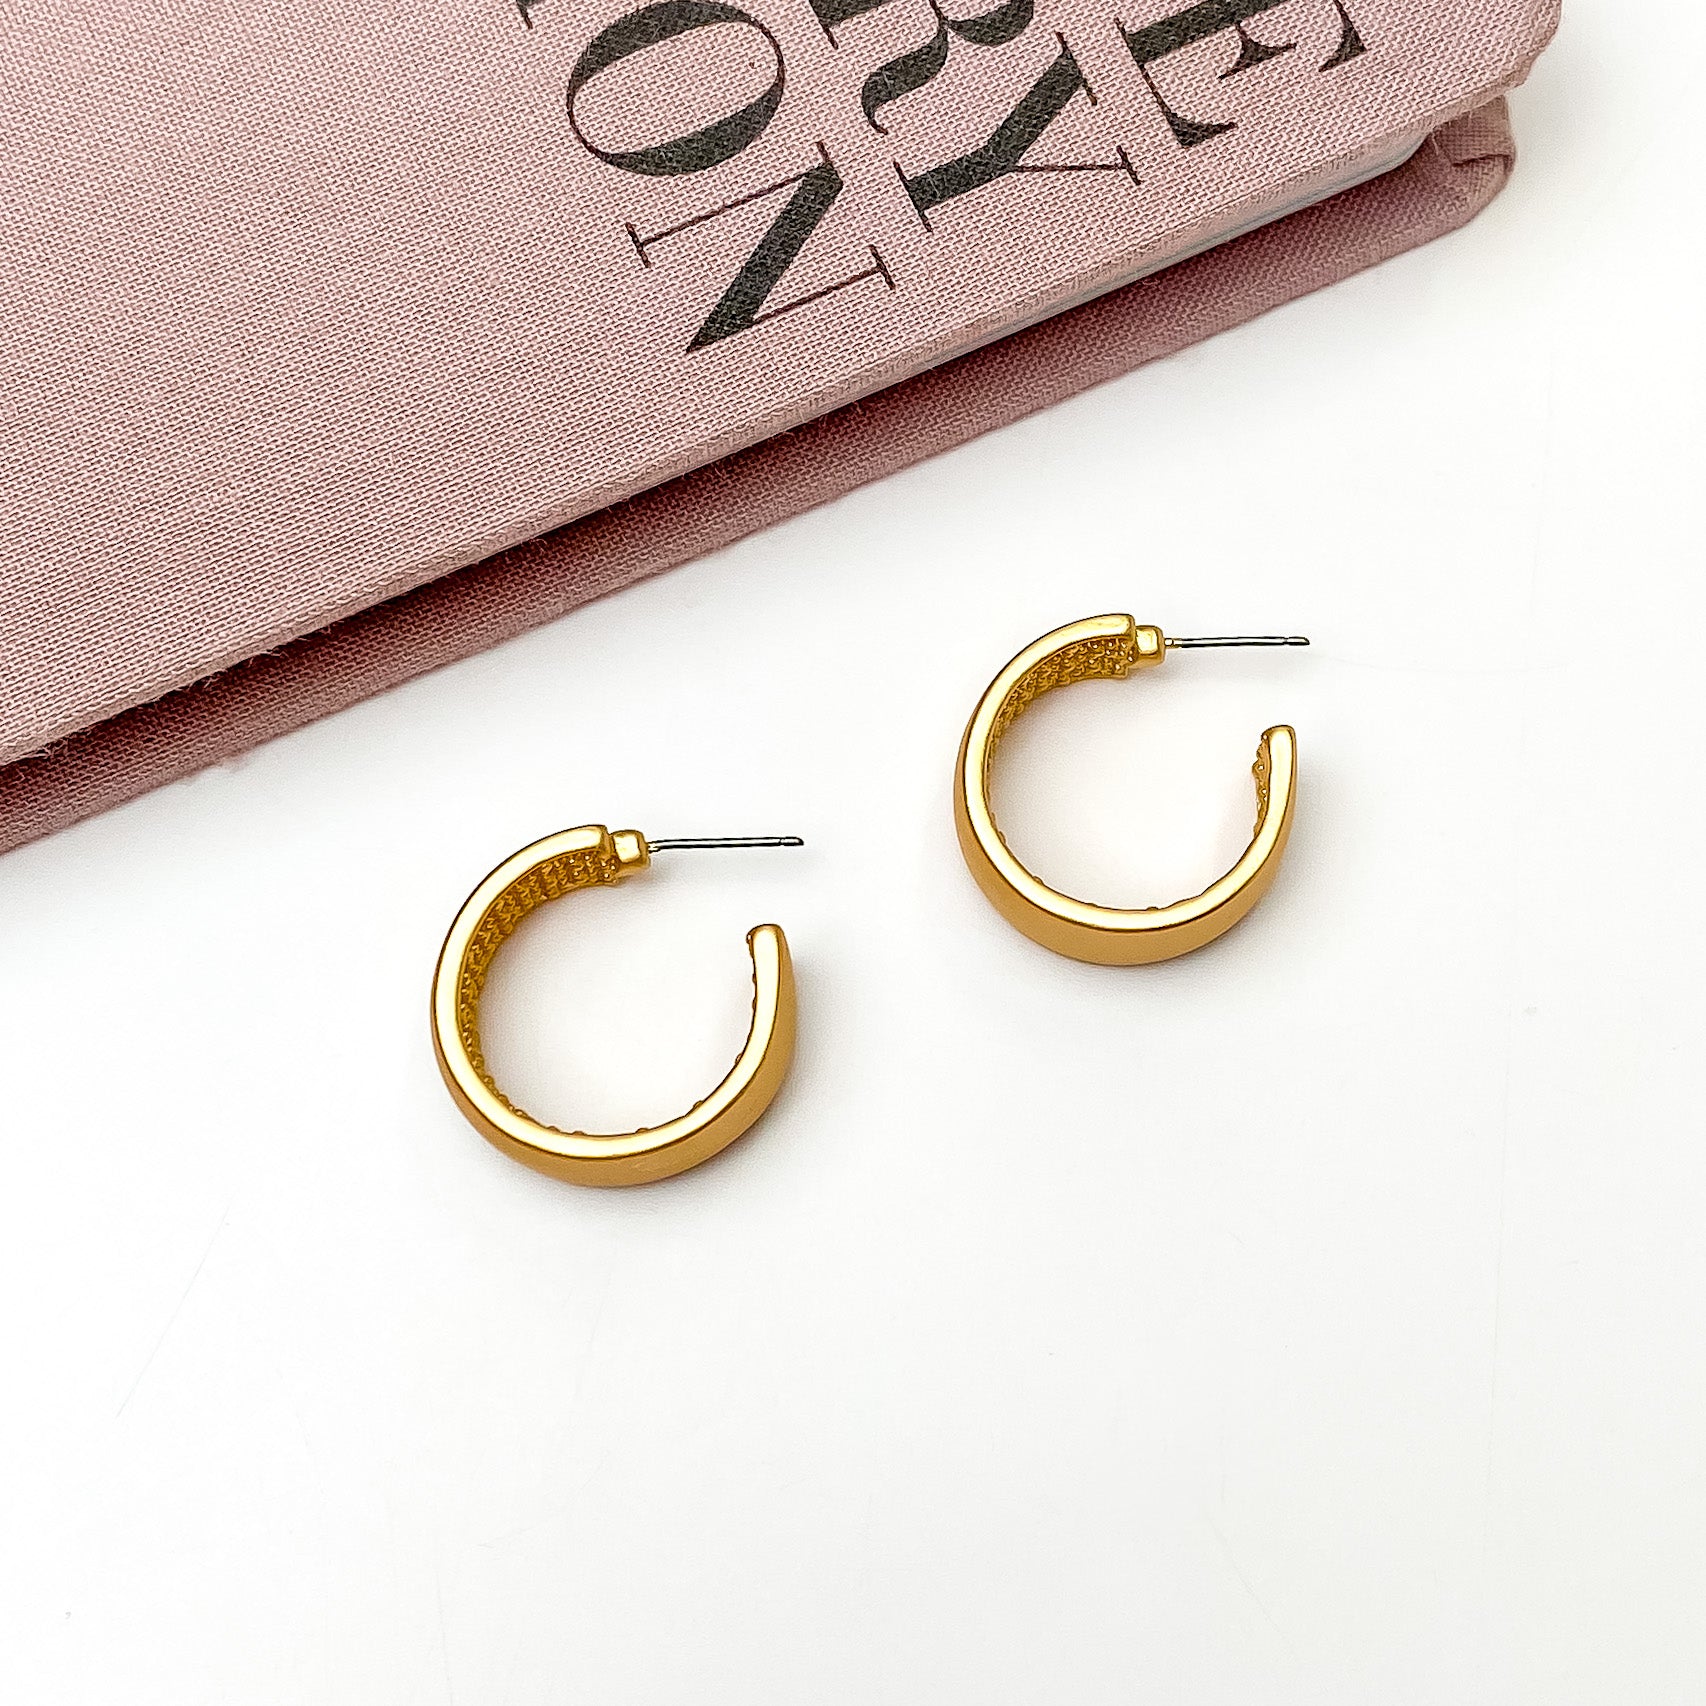 Gold Tone Small Hoop Earrings With a Textured Inside - Giddy Up Glamour Boutique